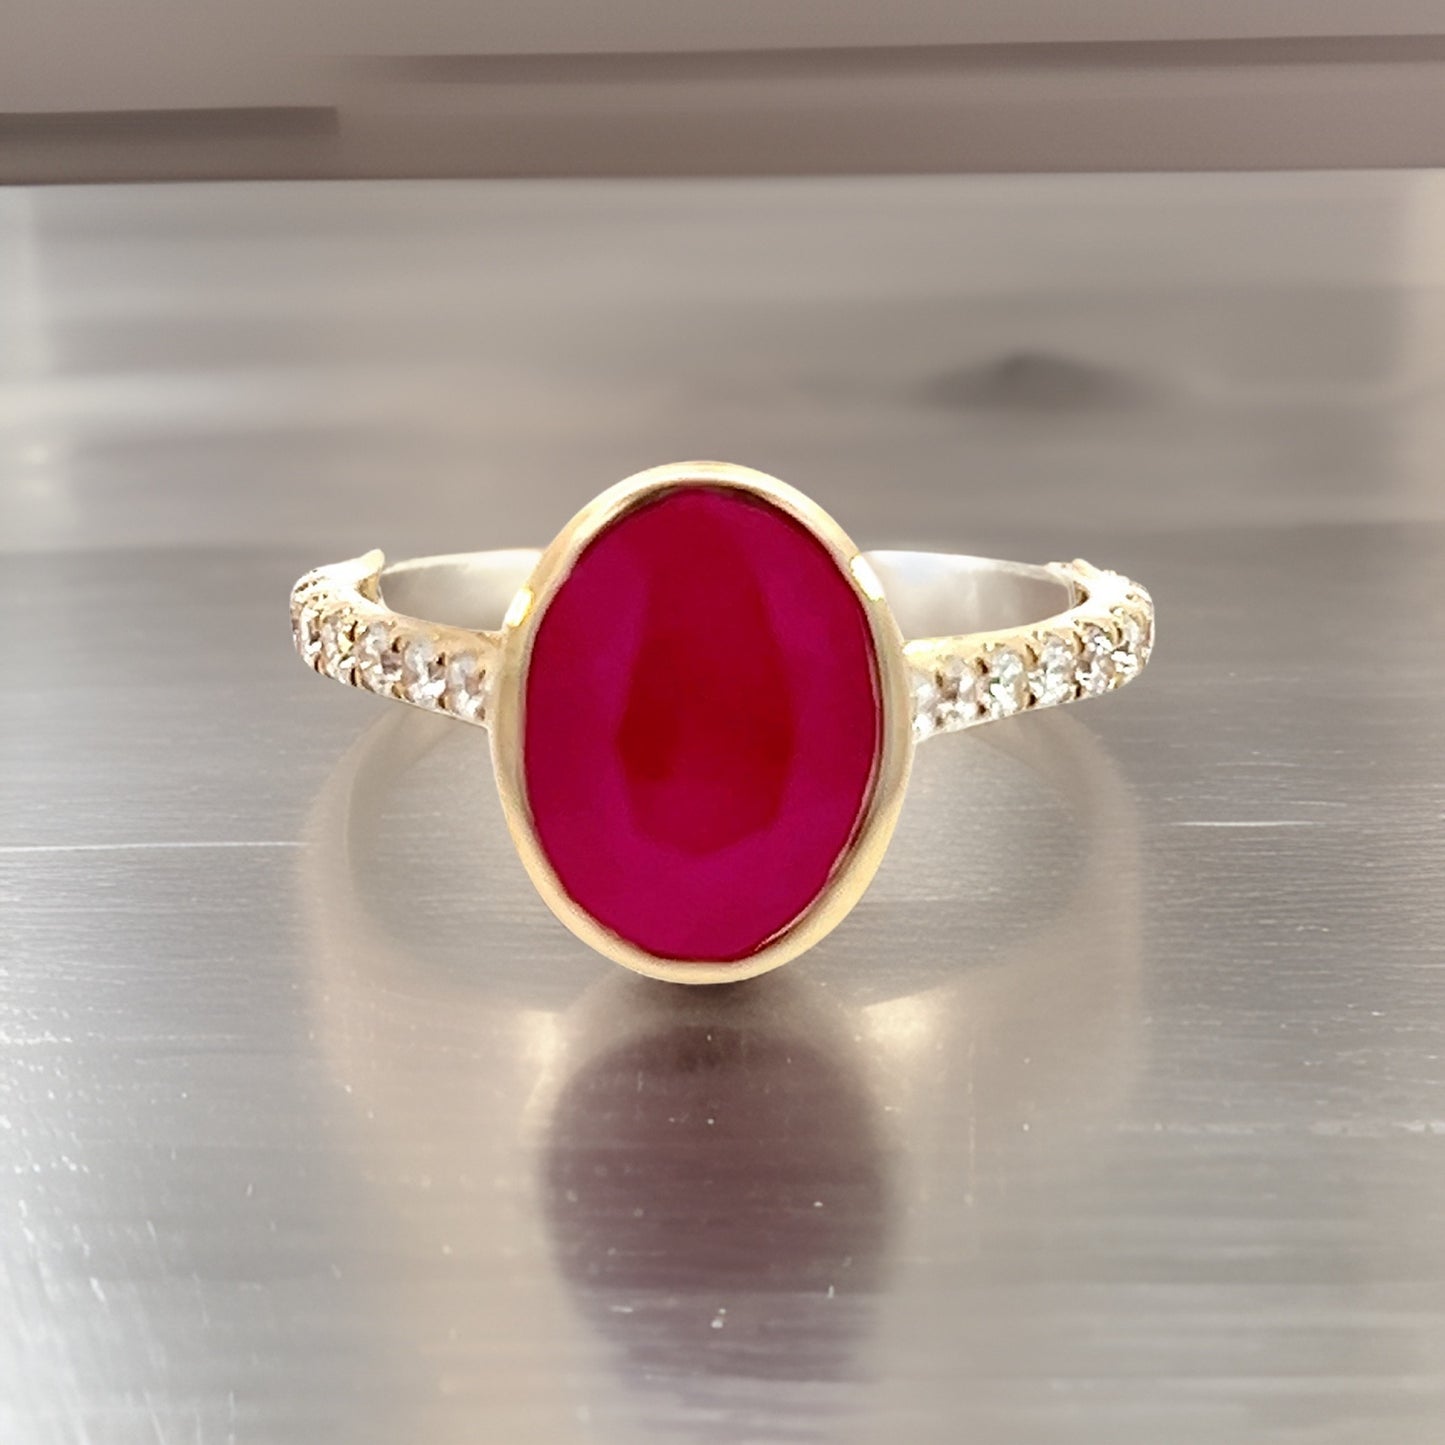 Natural Ruby Diamond Ring 6.75 14k Y Gold 4.38 TCW Certified $4,950 310583